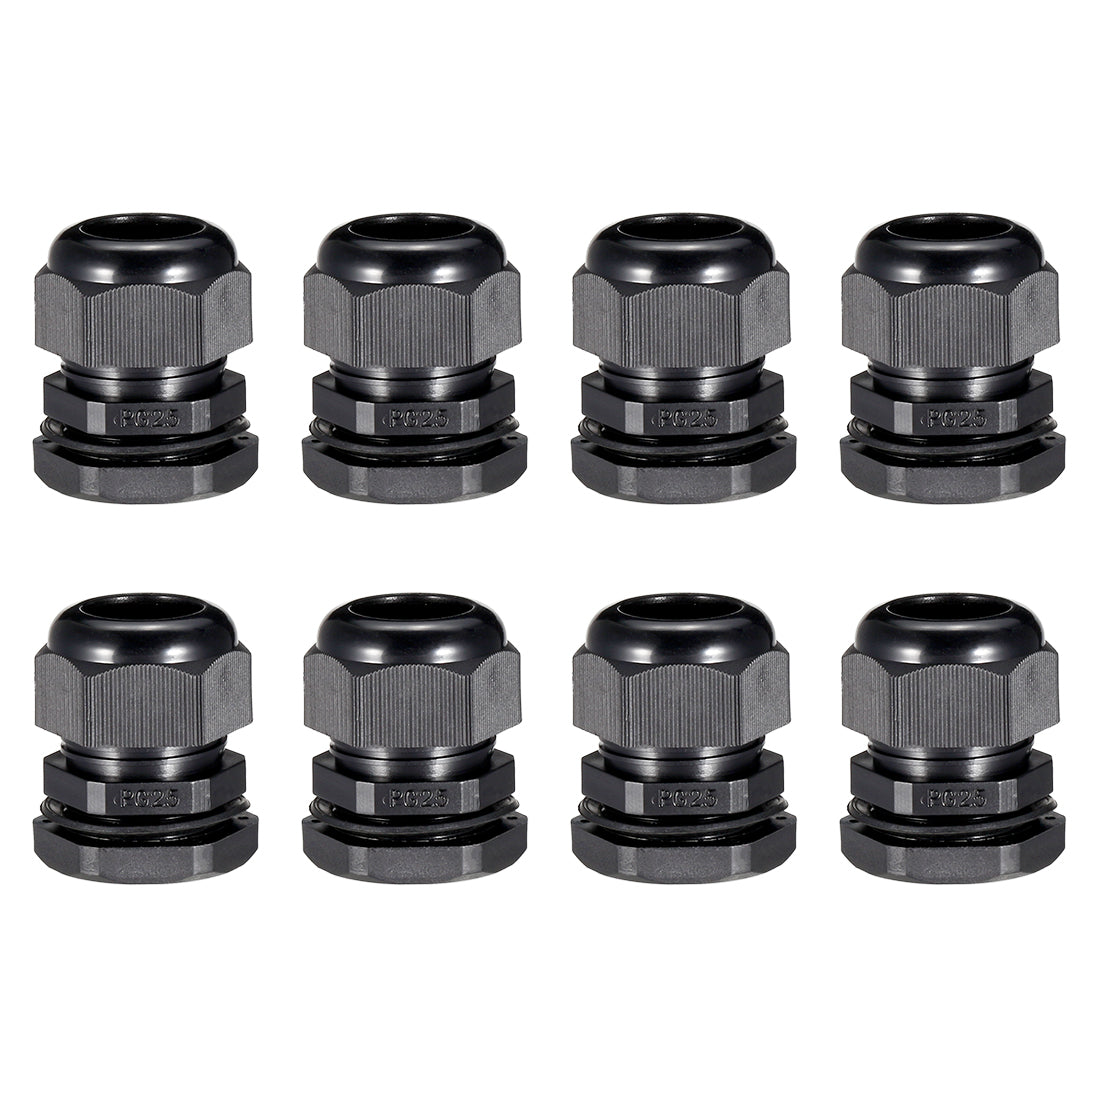 uxcell Uxcell 8Pcs PG25 Cable Gland Waterproof Connector Plastic Wire Glands Joints Black for 16-21mm Dia Wires